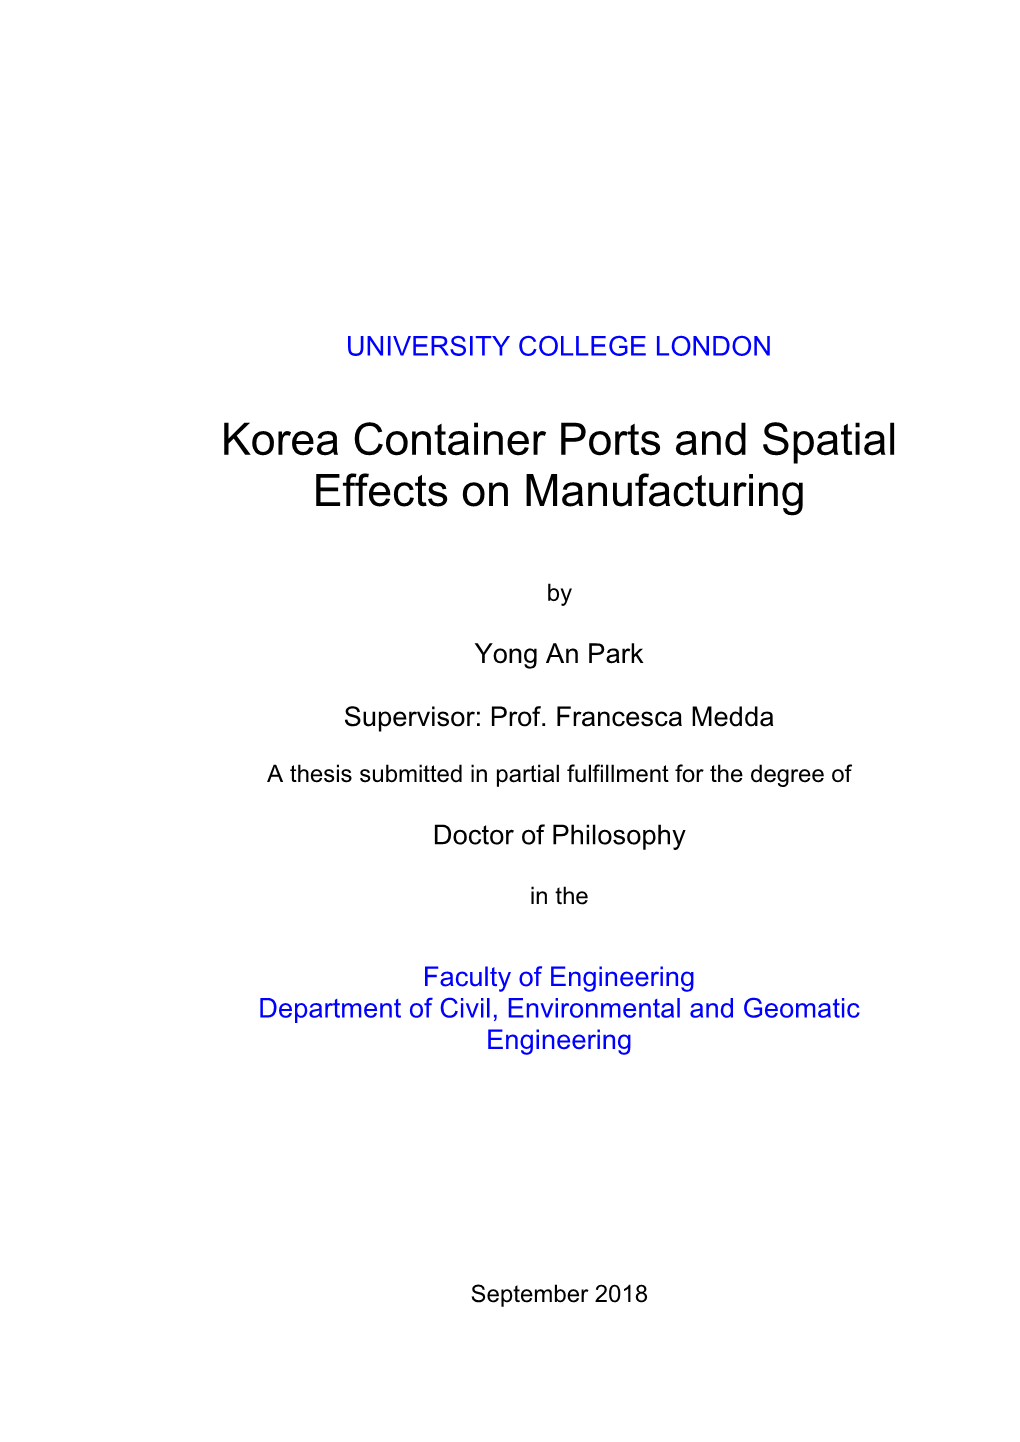 Korea Container Ports and Spatial Effects on Manufacturing